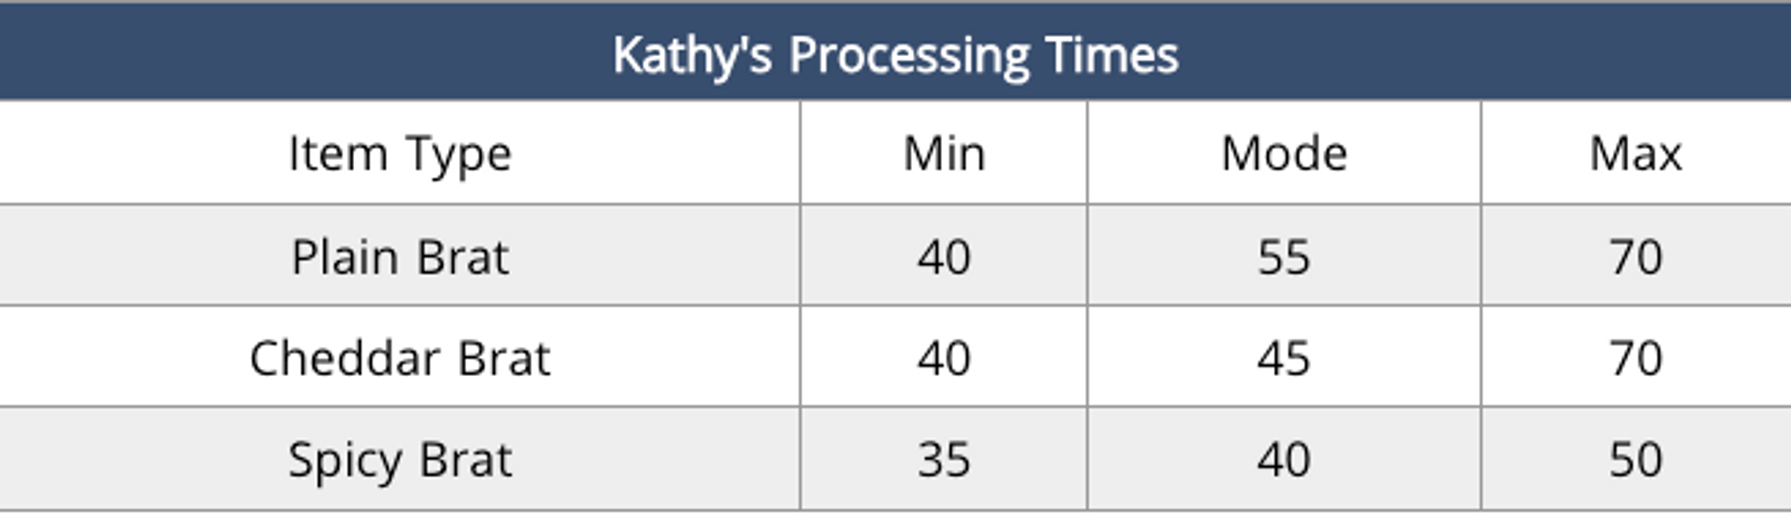 Kathy's Processing Times Table